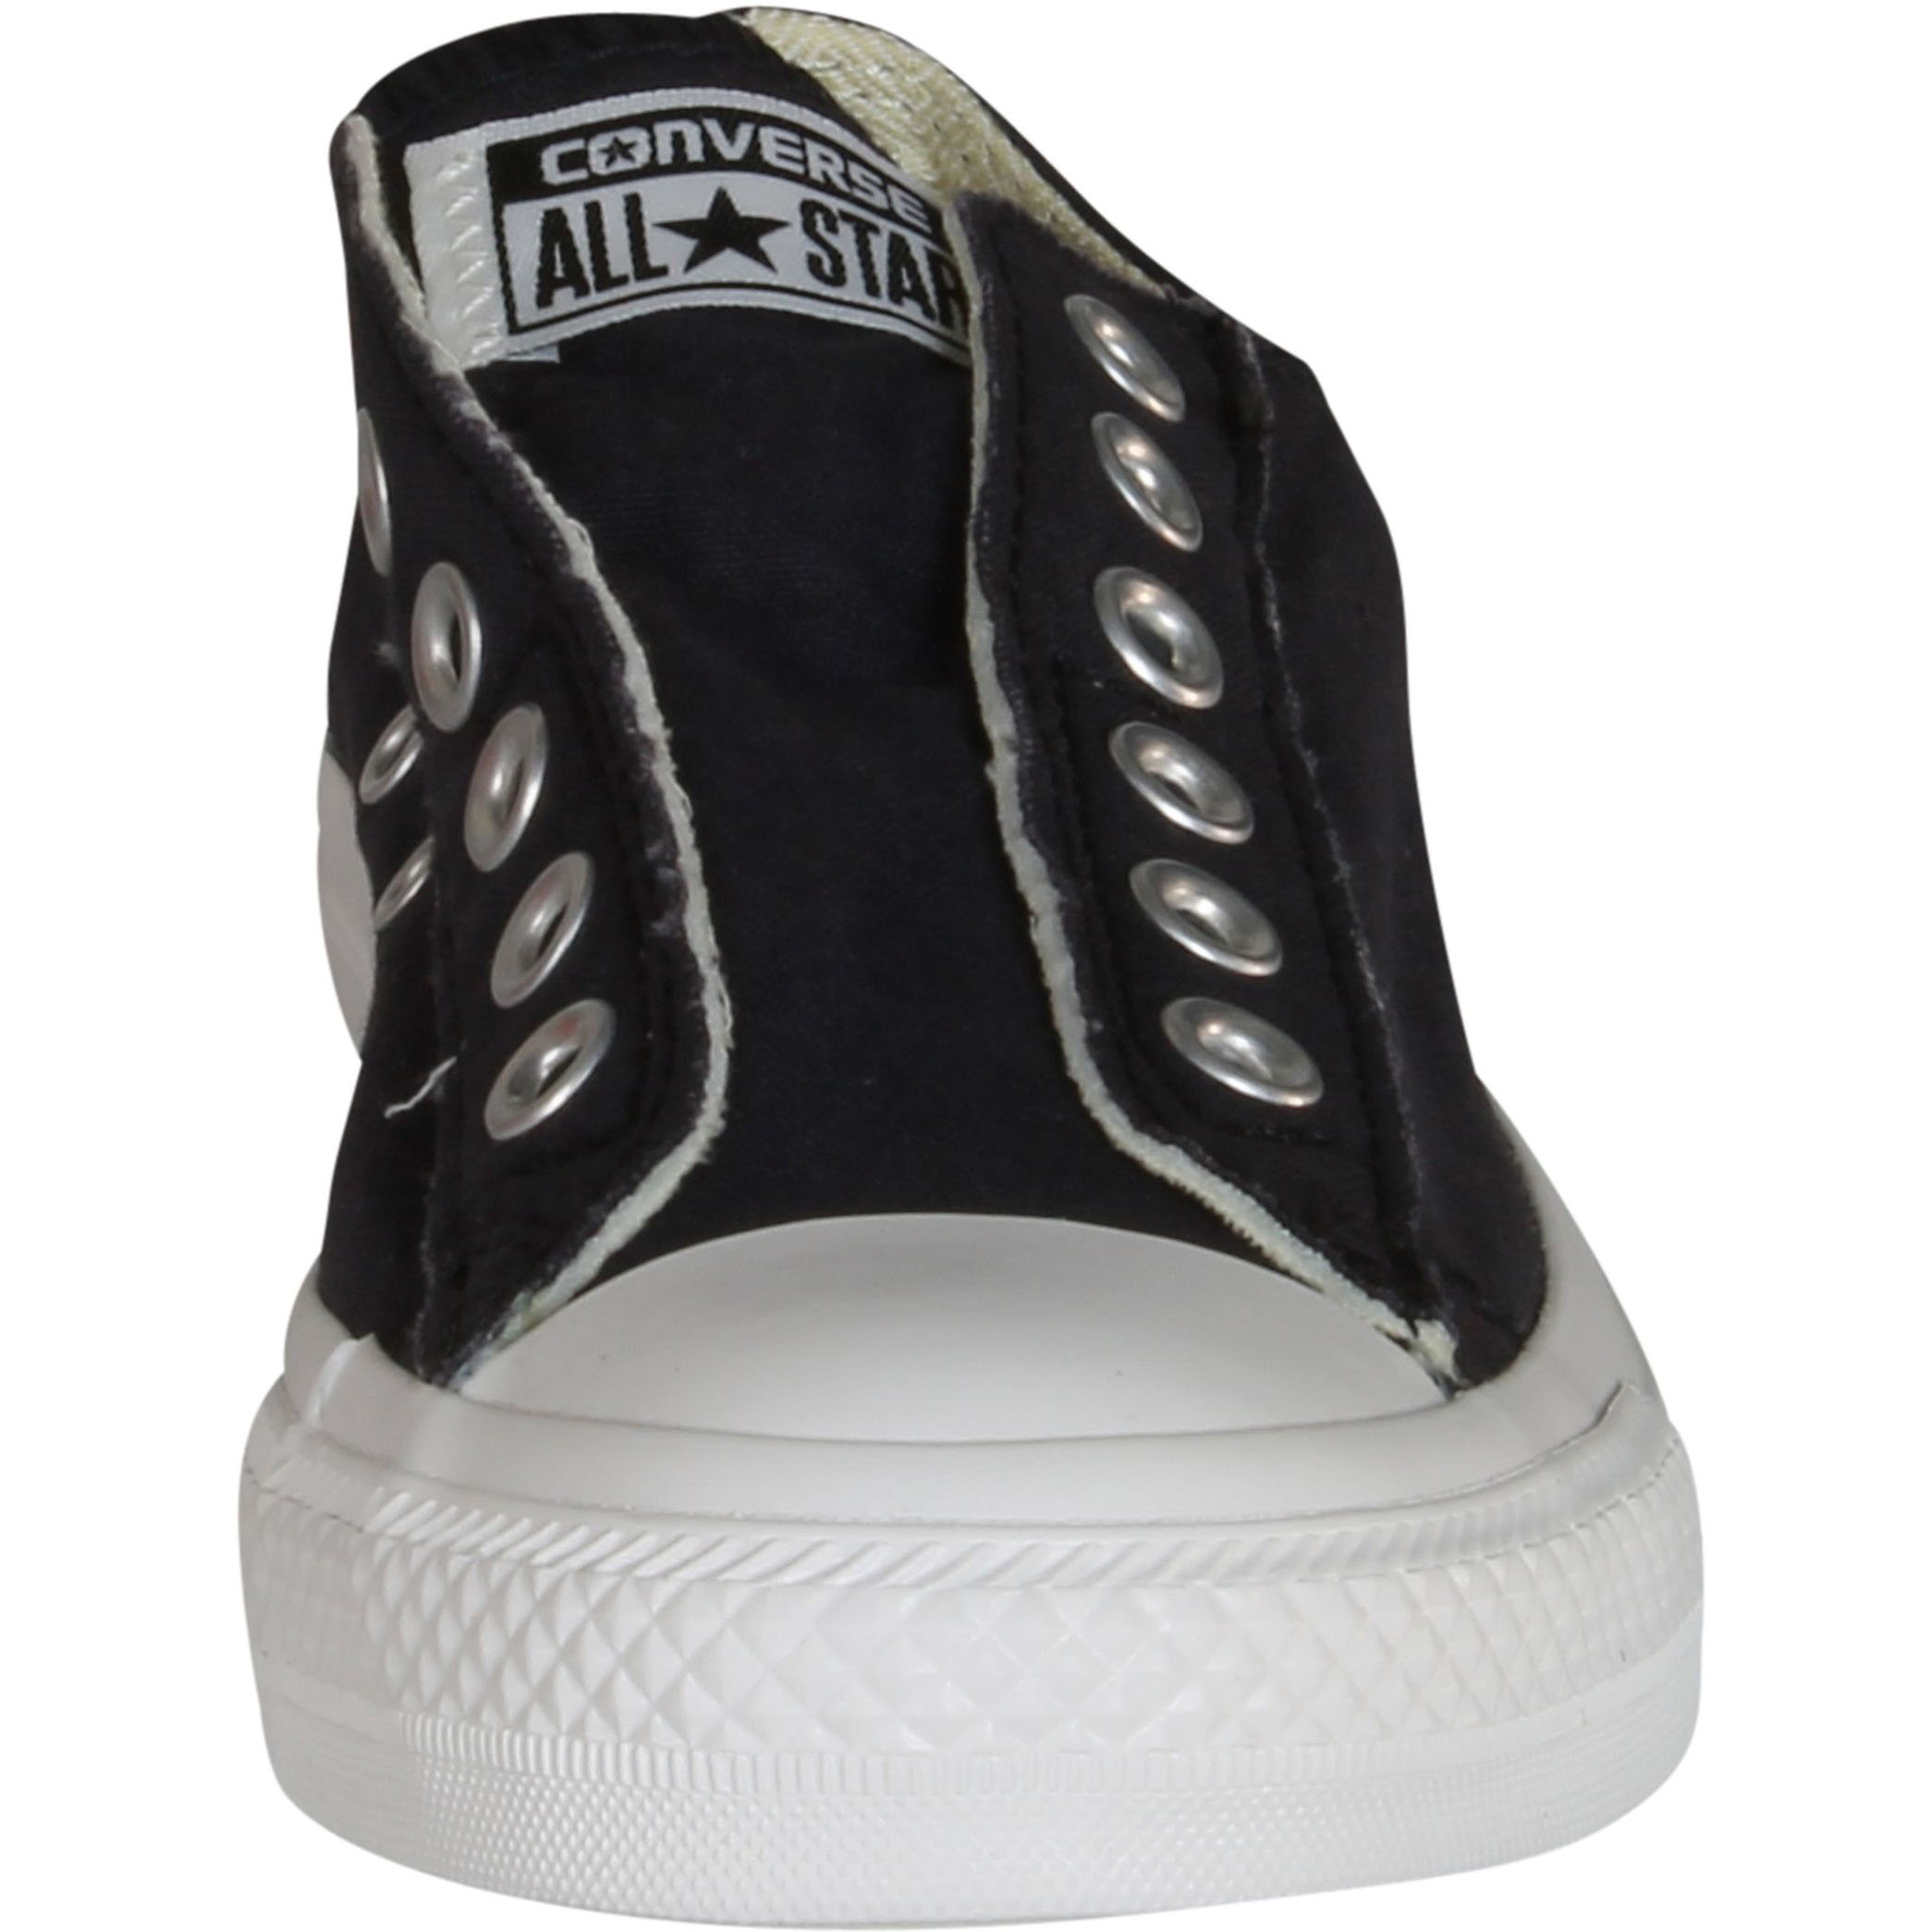 Mens Converse Chuck Taylor All Star Slip On OX Low Top Black White 1T3 - image 3 of 4